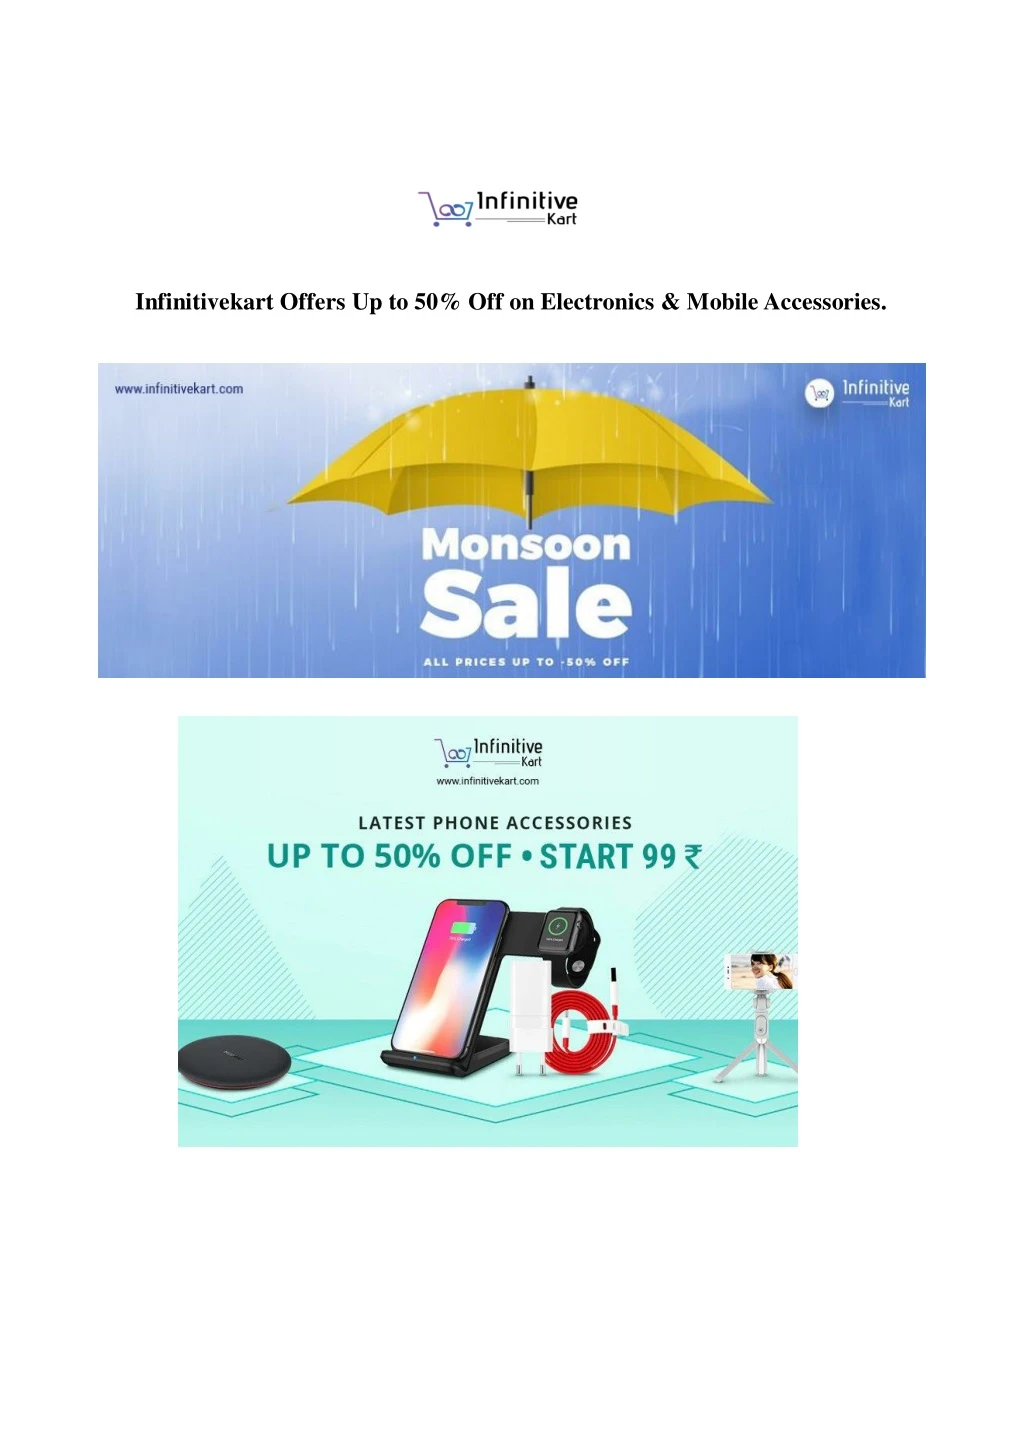 infinitivekart offers up to 50 off on electronics